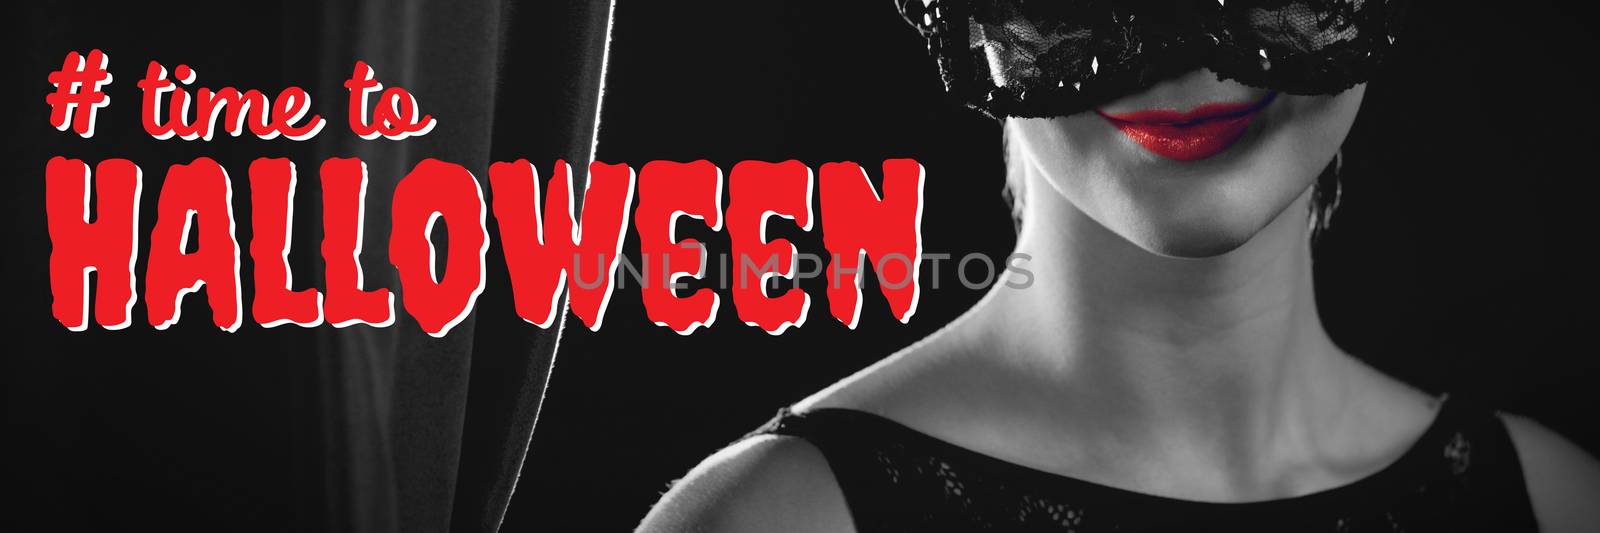 Composite image of digital composite image of time to halloween text by Wavebreakmedia